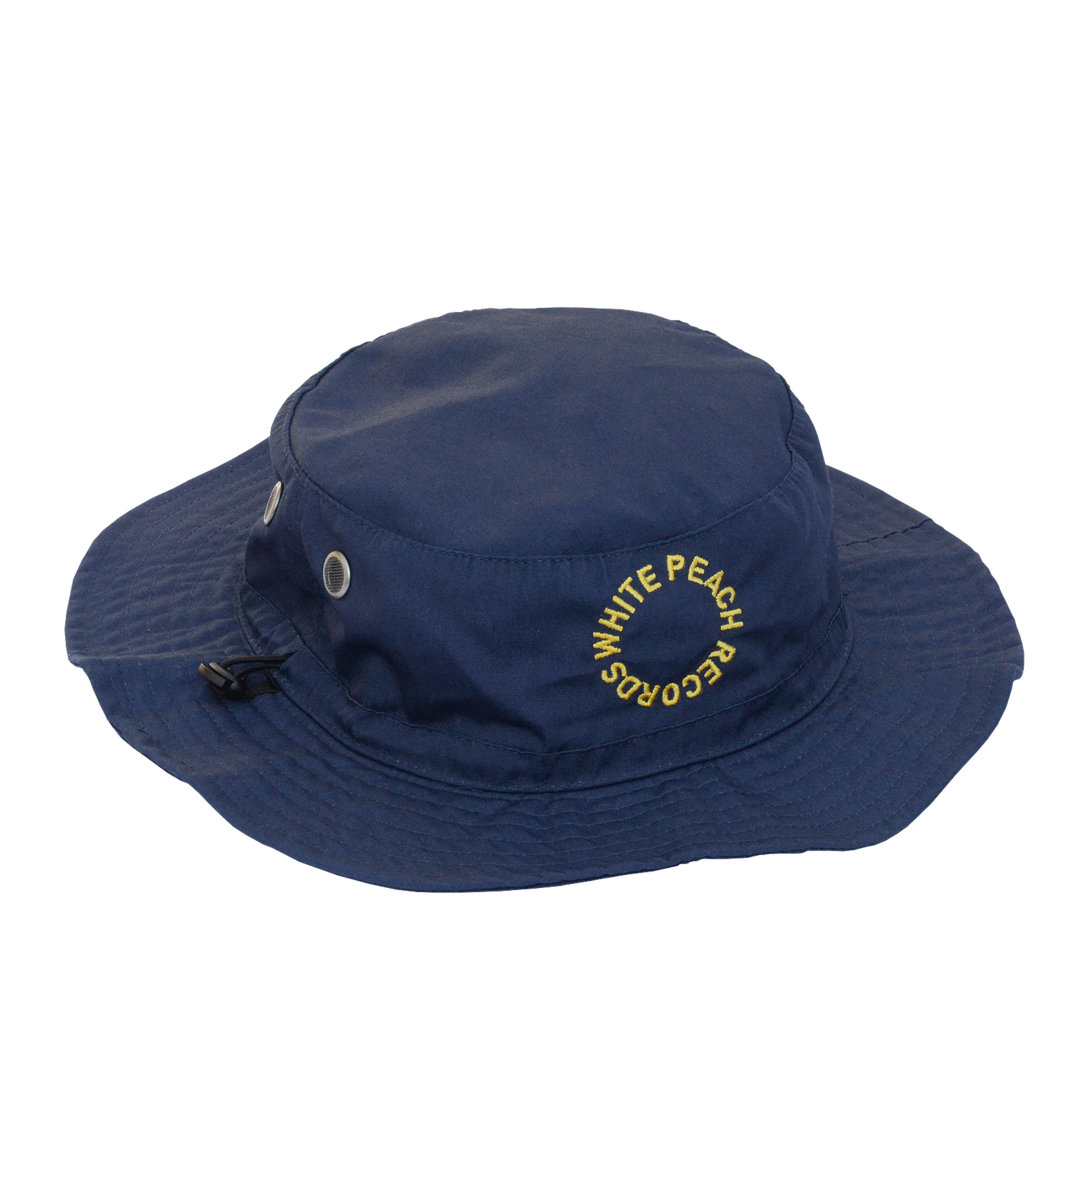 WPT013 - Navy Bucket Hat W/ Yellow Embroidery | White Peach